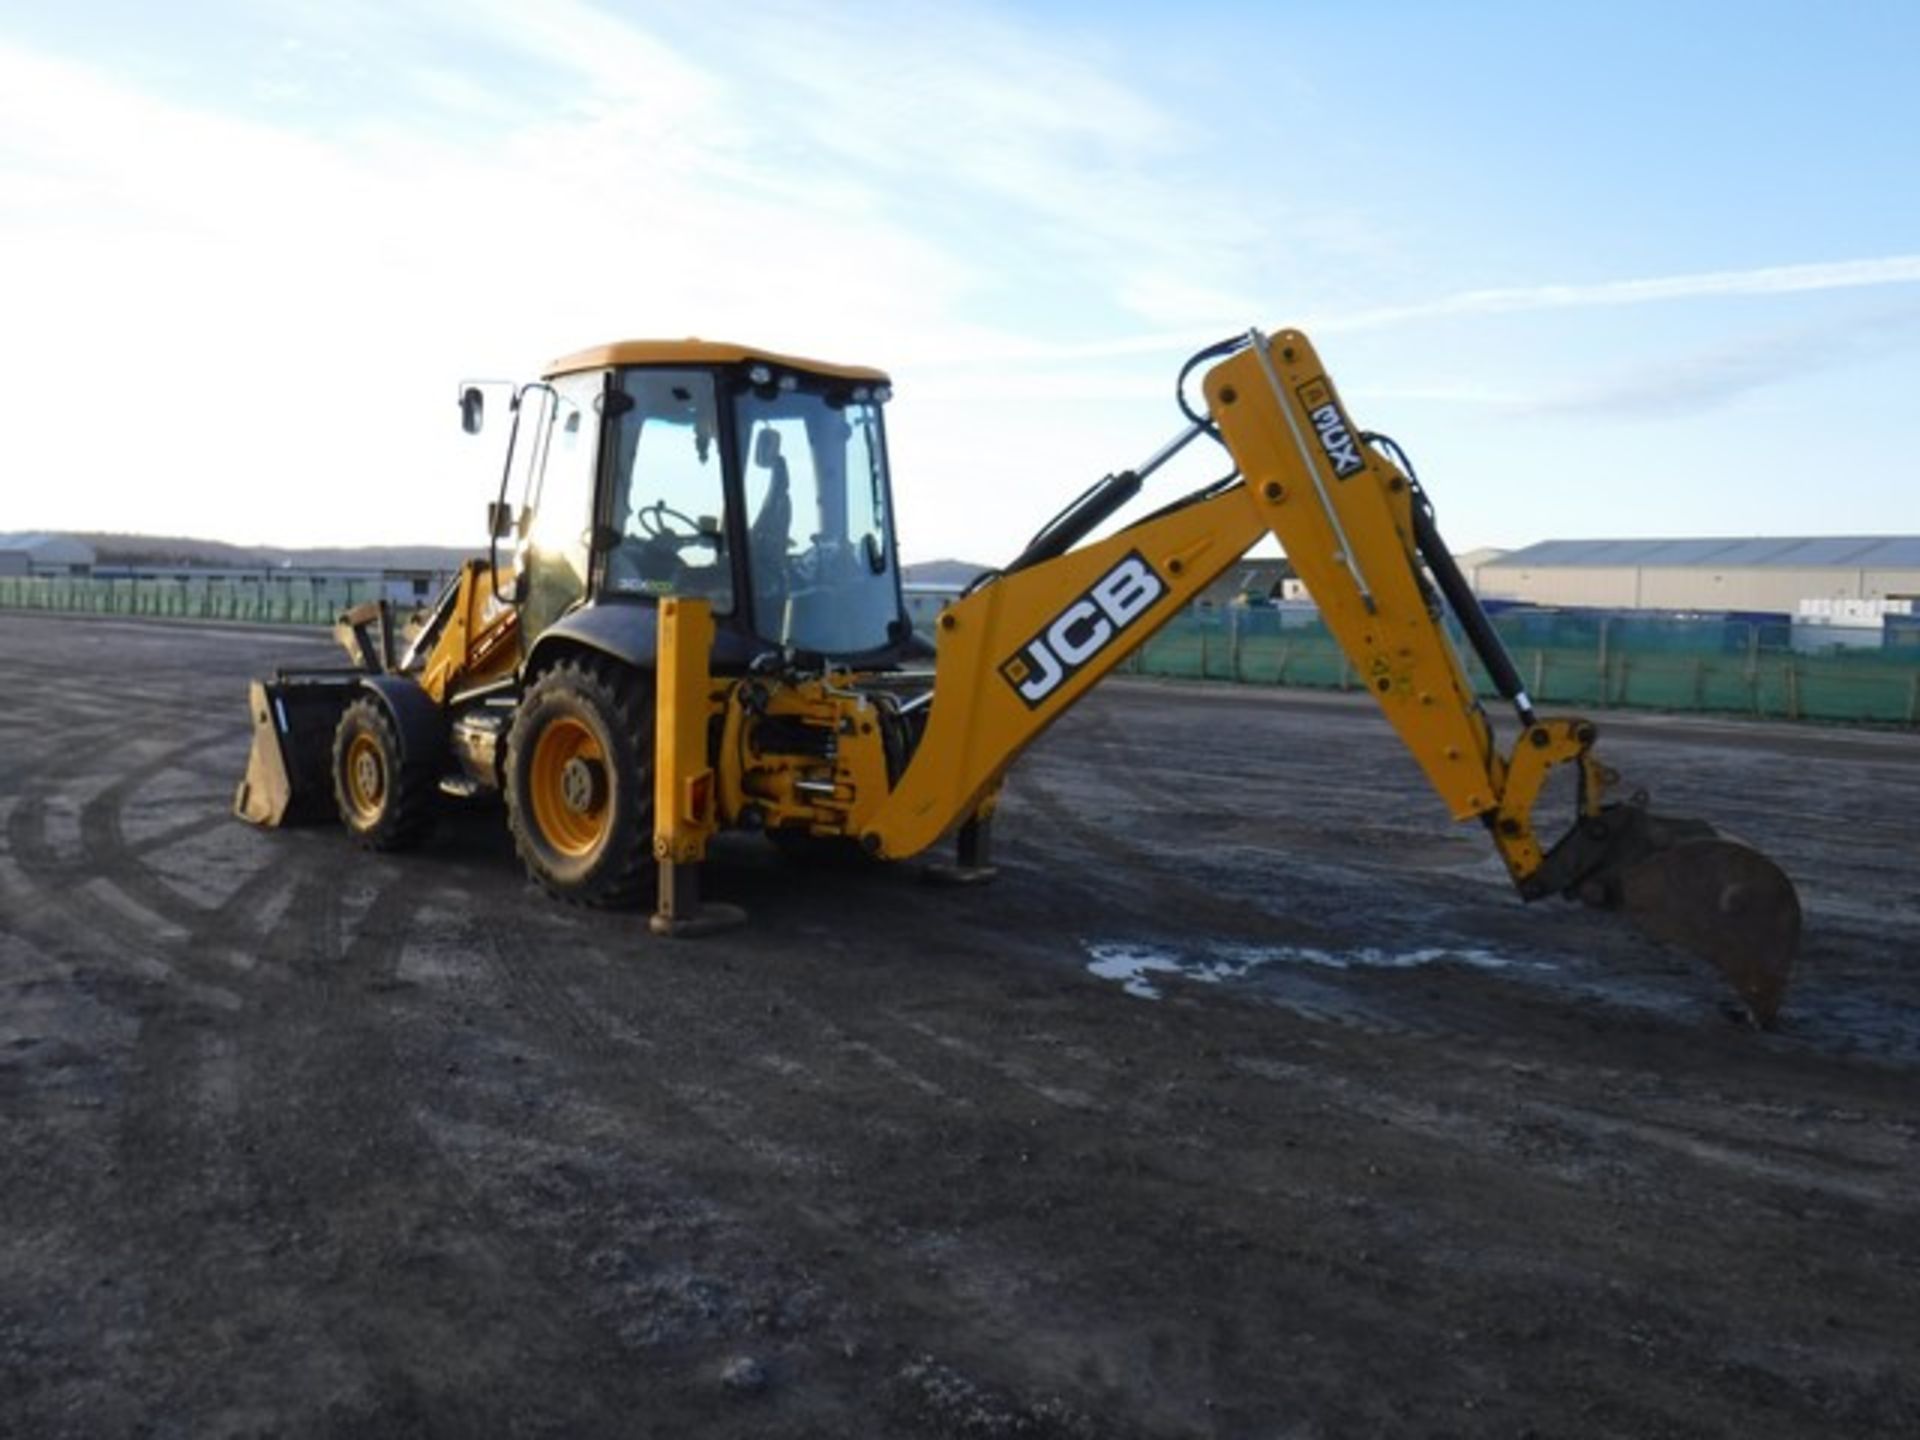 2011 JCB 3CX ECO 4 in 1 bucket S/N JCB3CX4TP02008318 - 6175 hrs (not verified) - Image 6 of 14